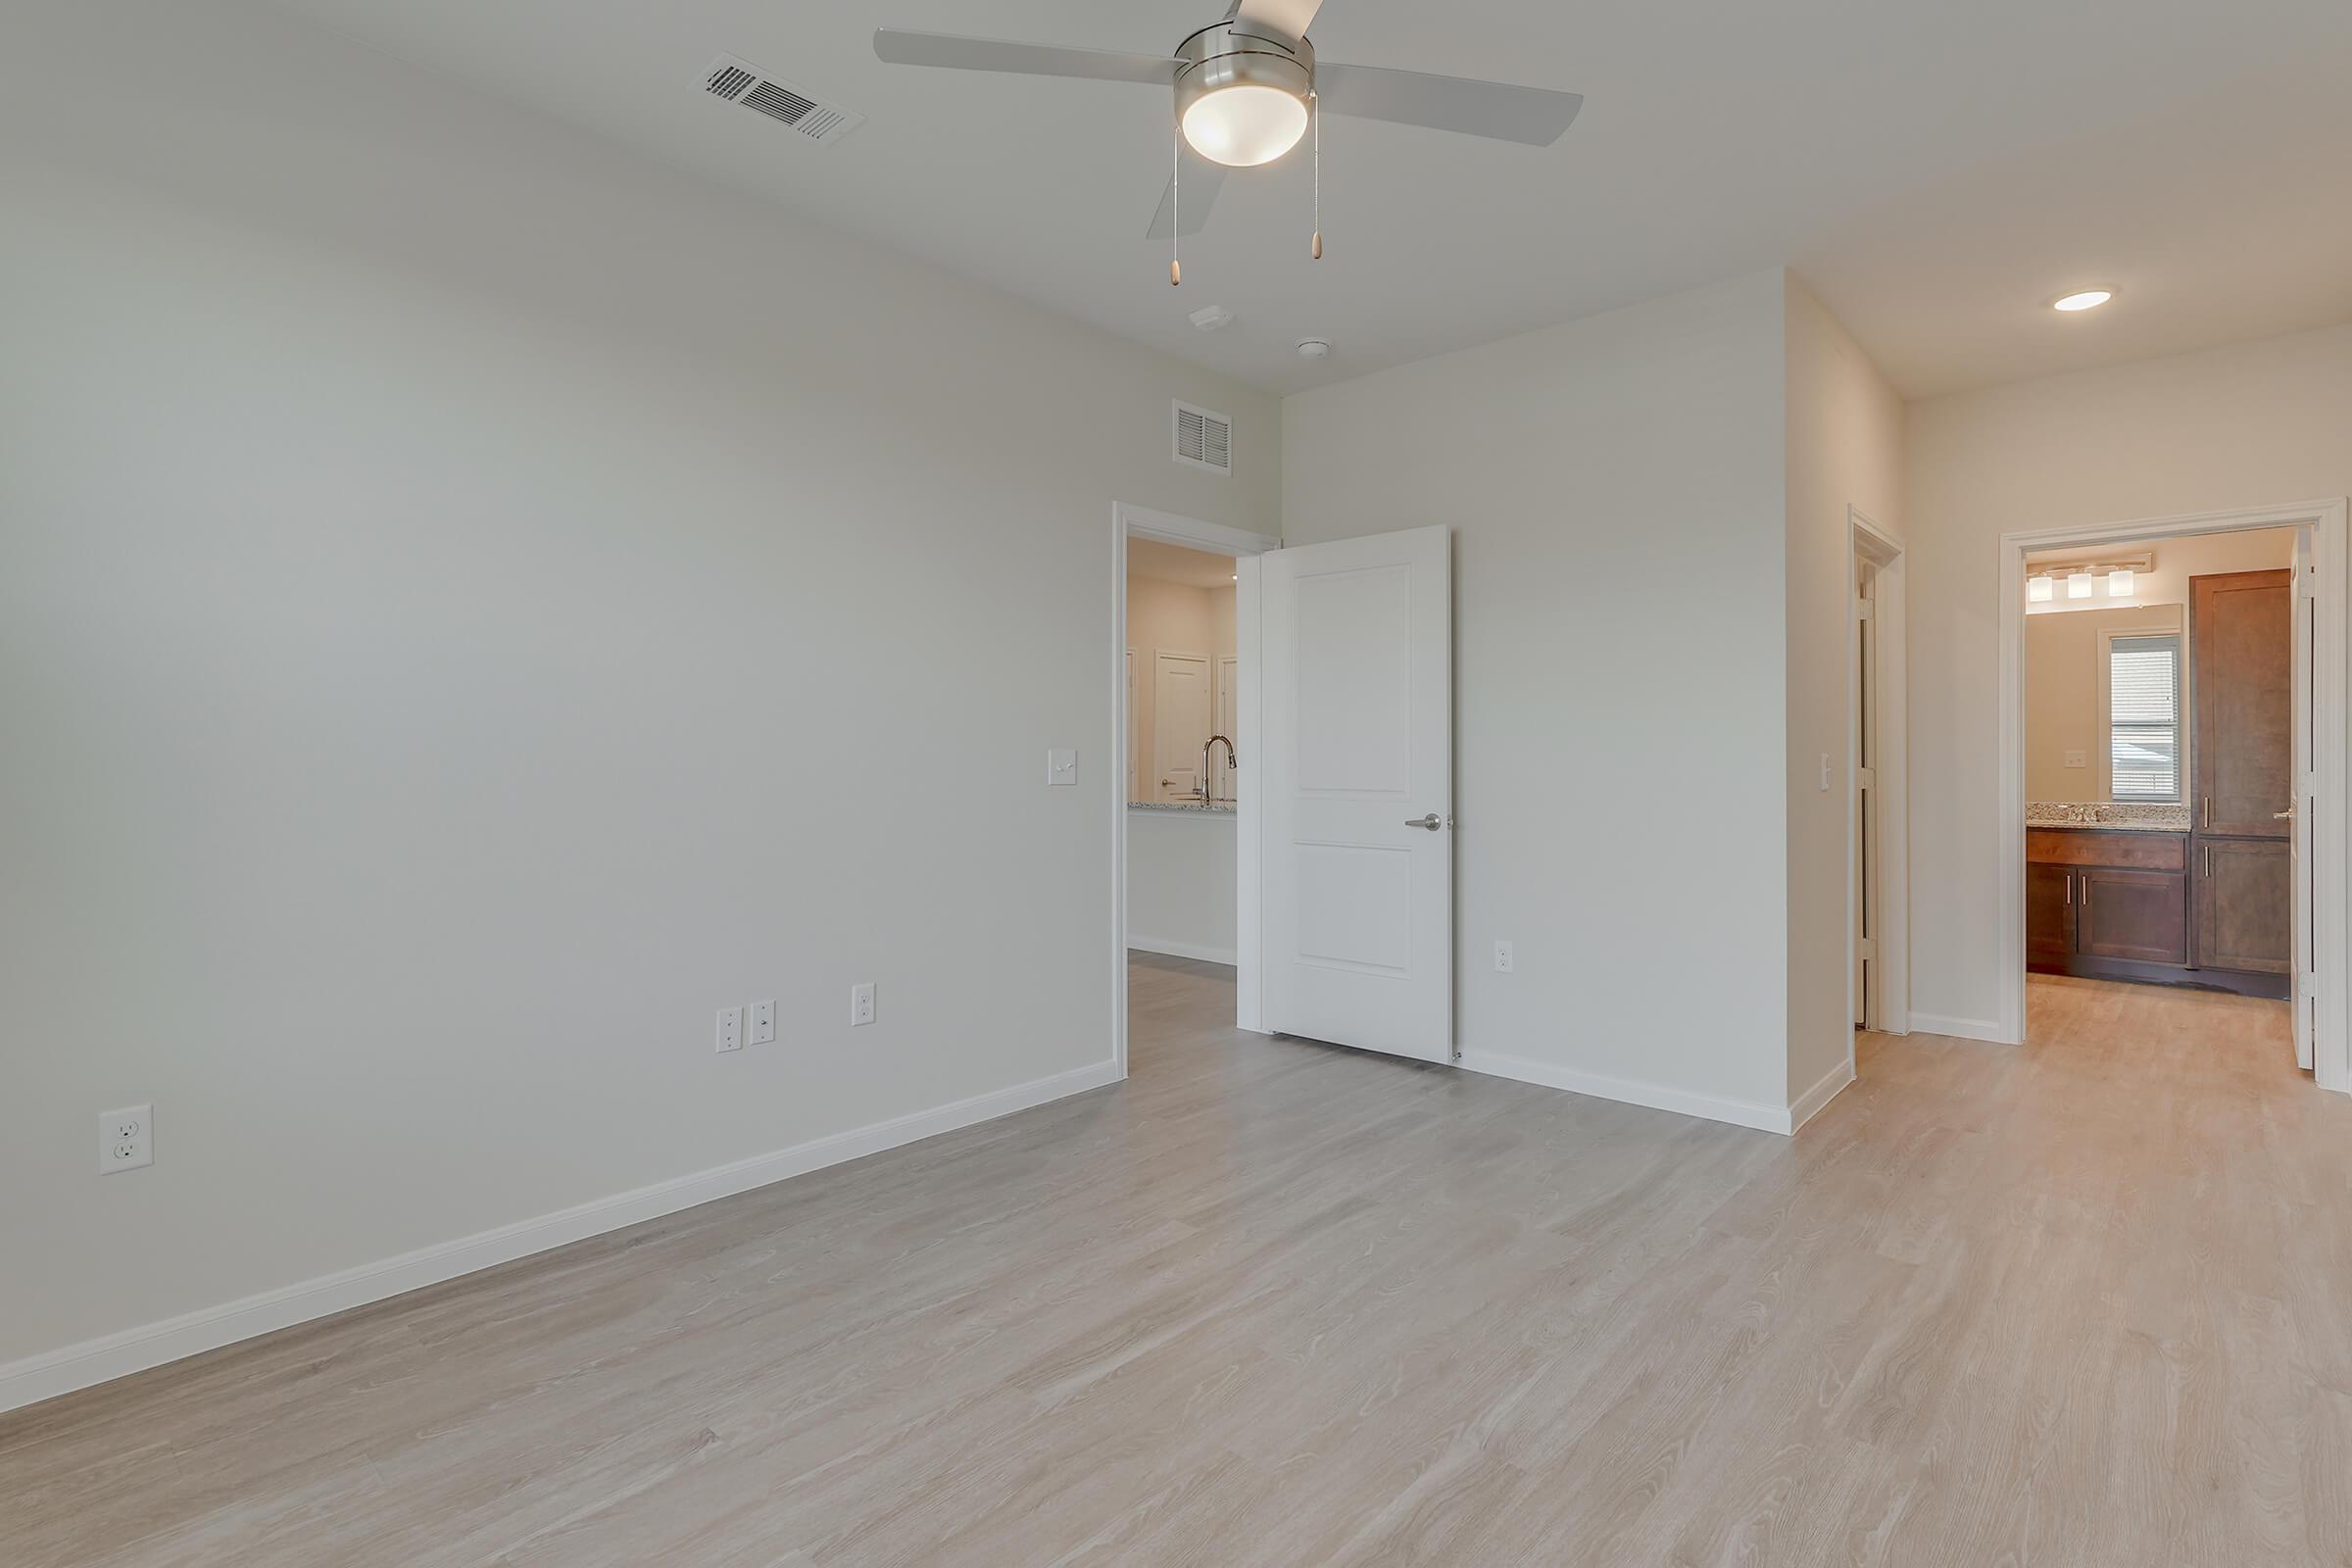 Legacy Ranch at Dessau East Apartments in Pflugerville TX With Hardwood Flooring, White Walls, With Access to the Bathroom